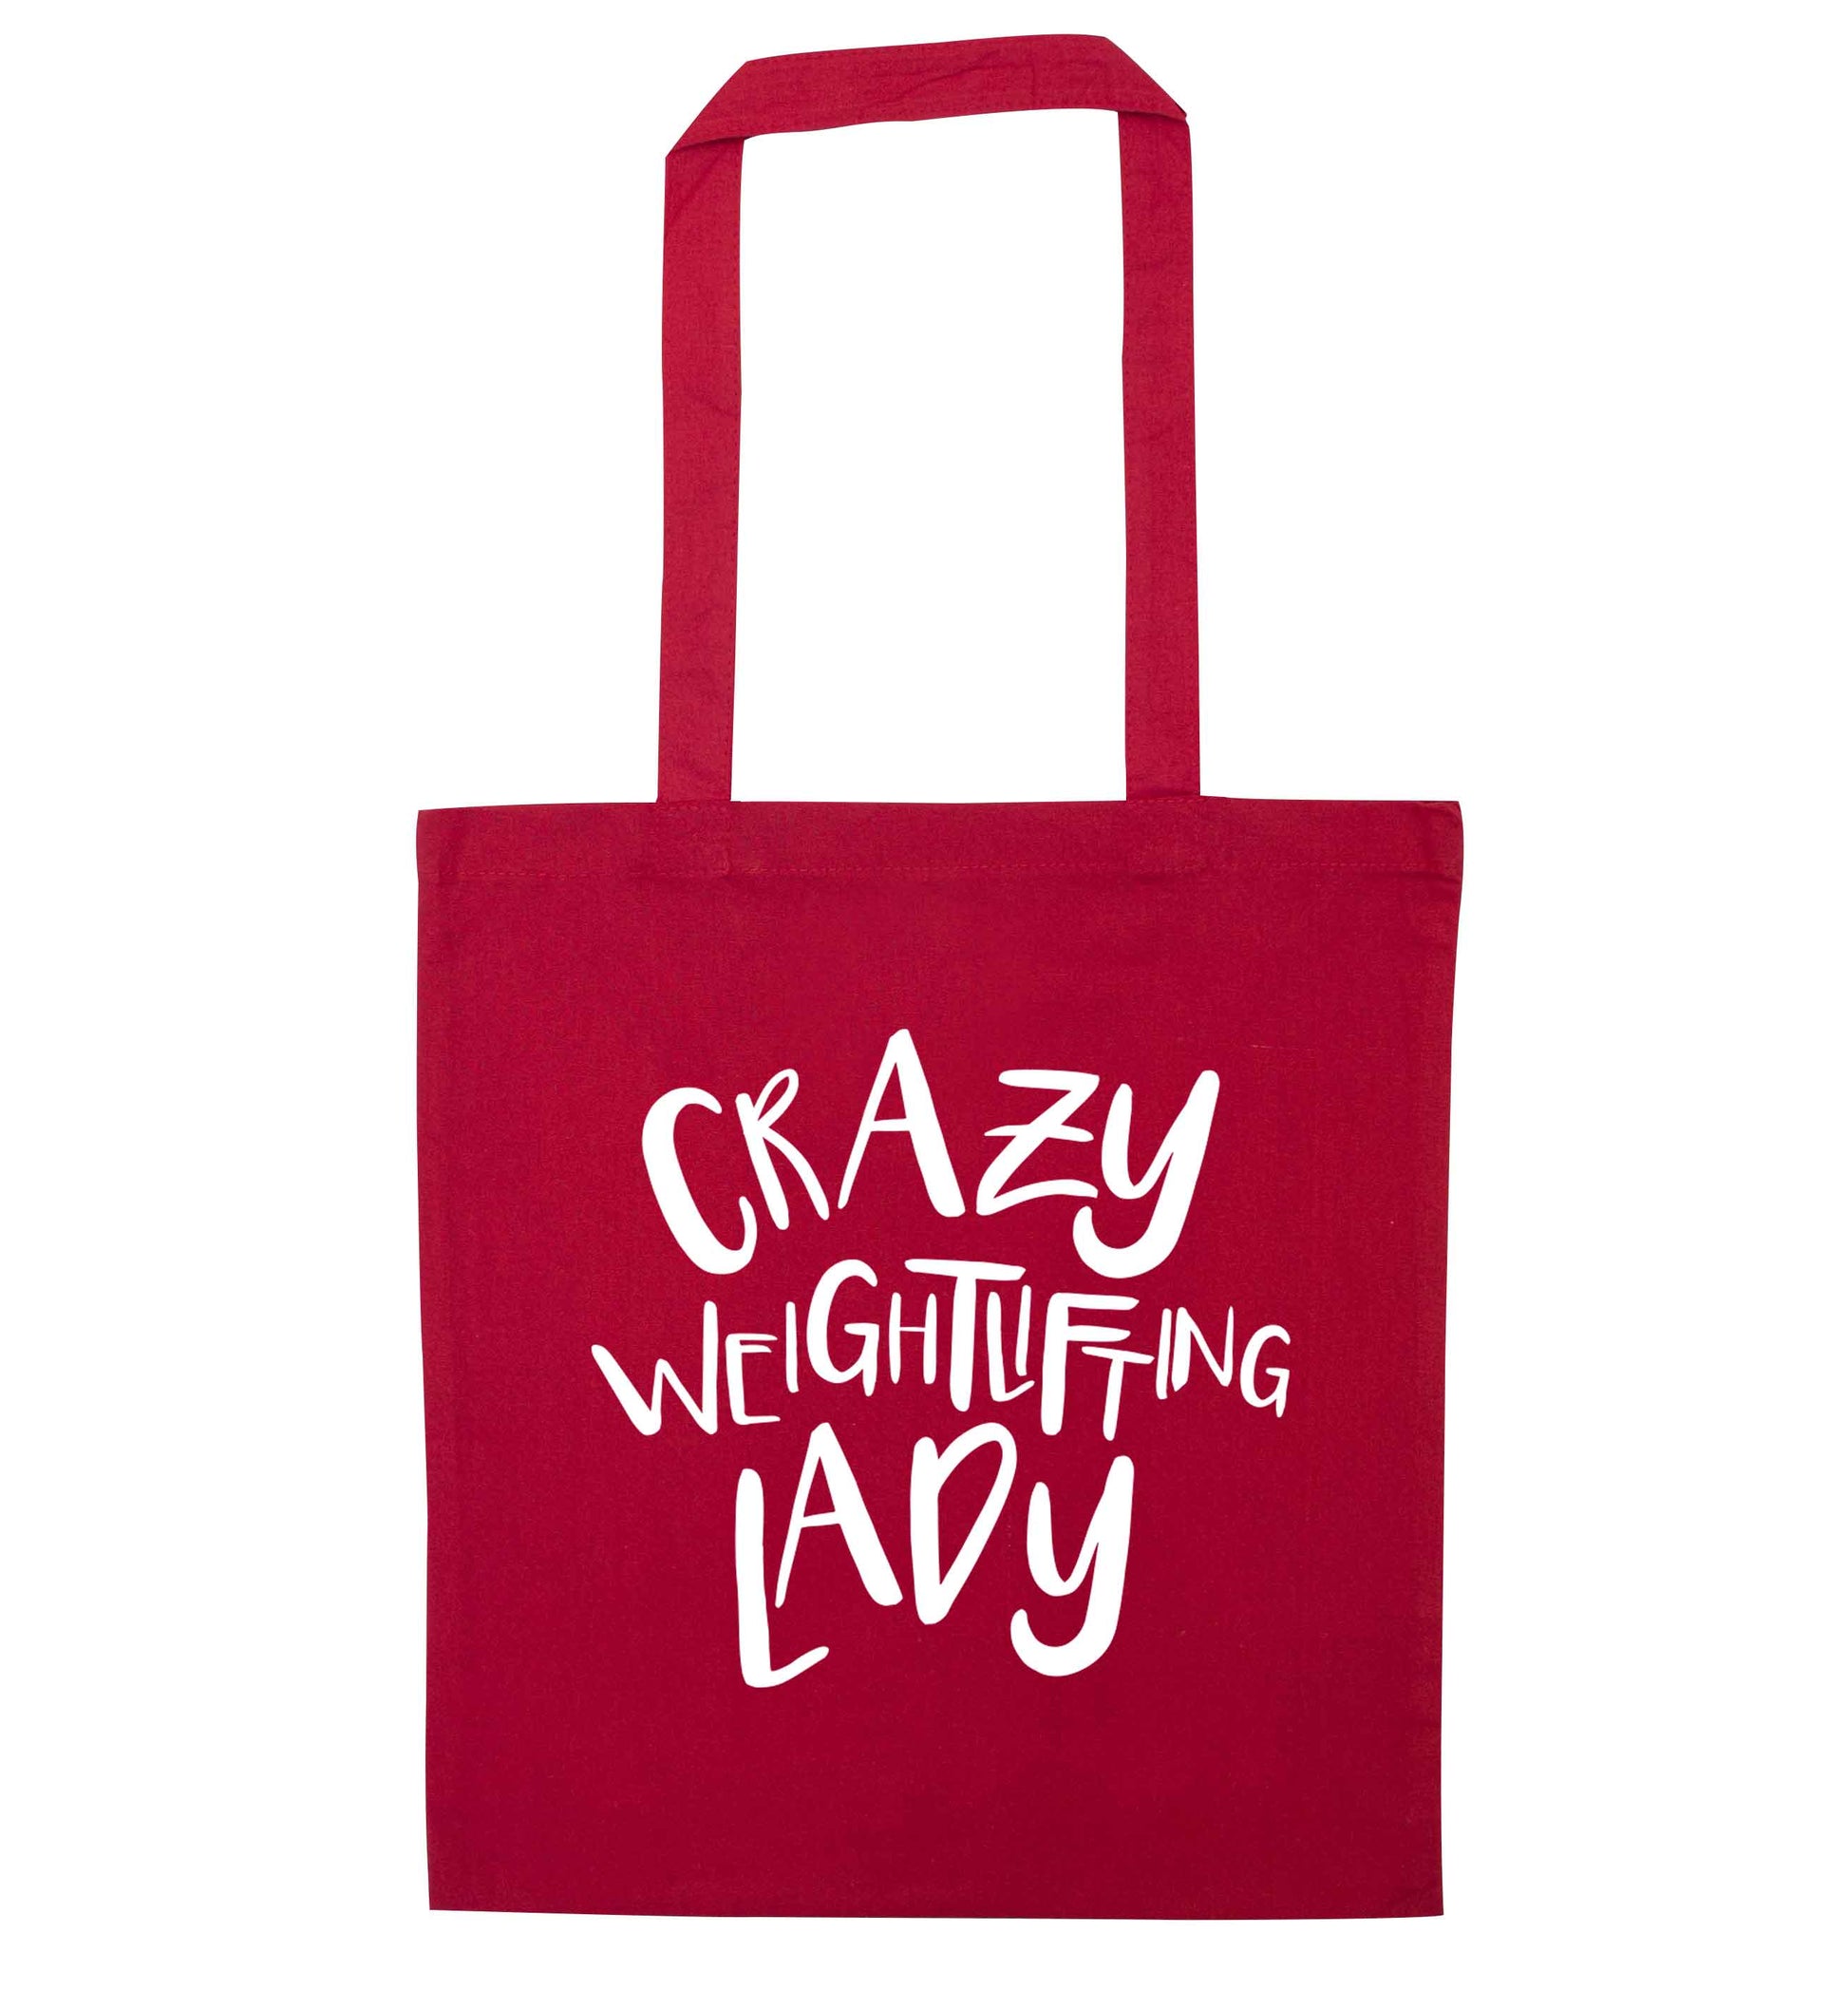 Crazy weightlifting lady red tote bag